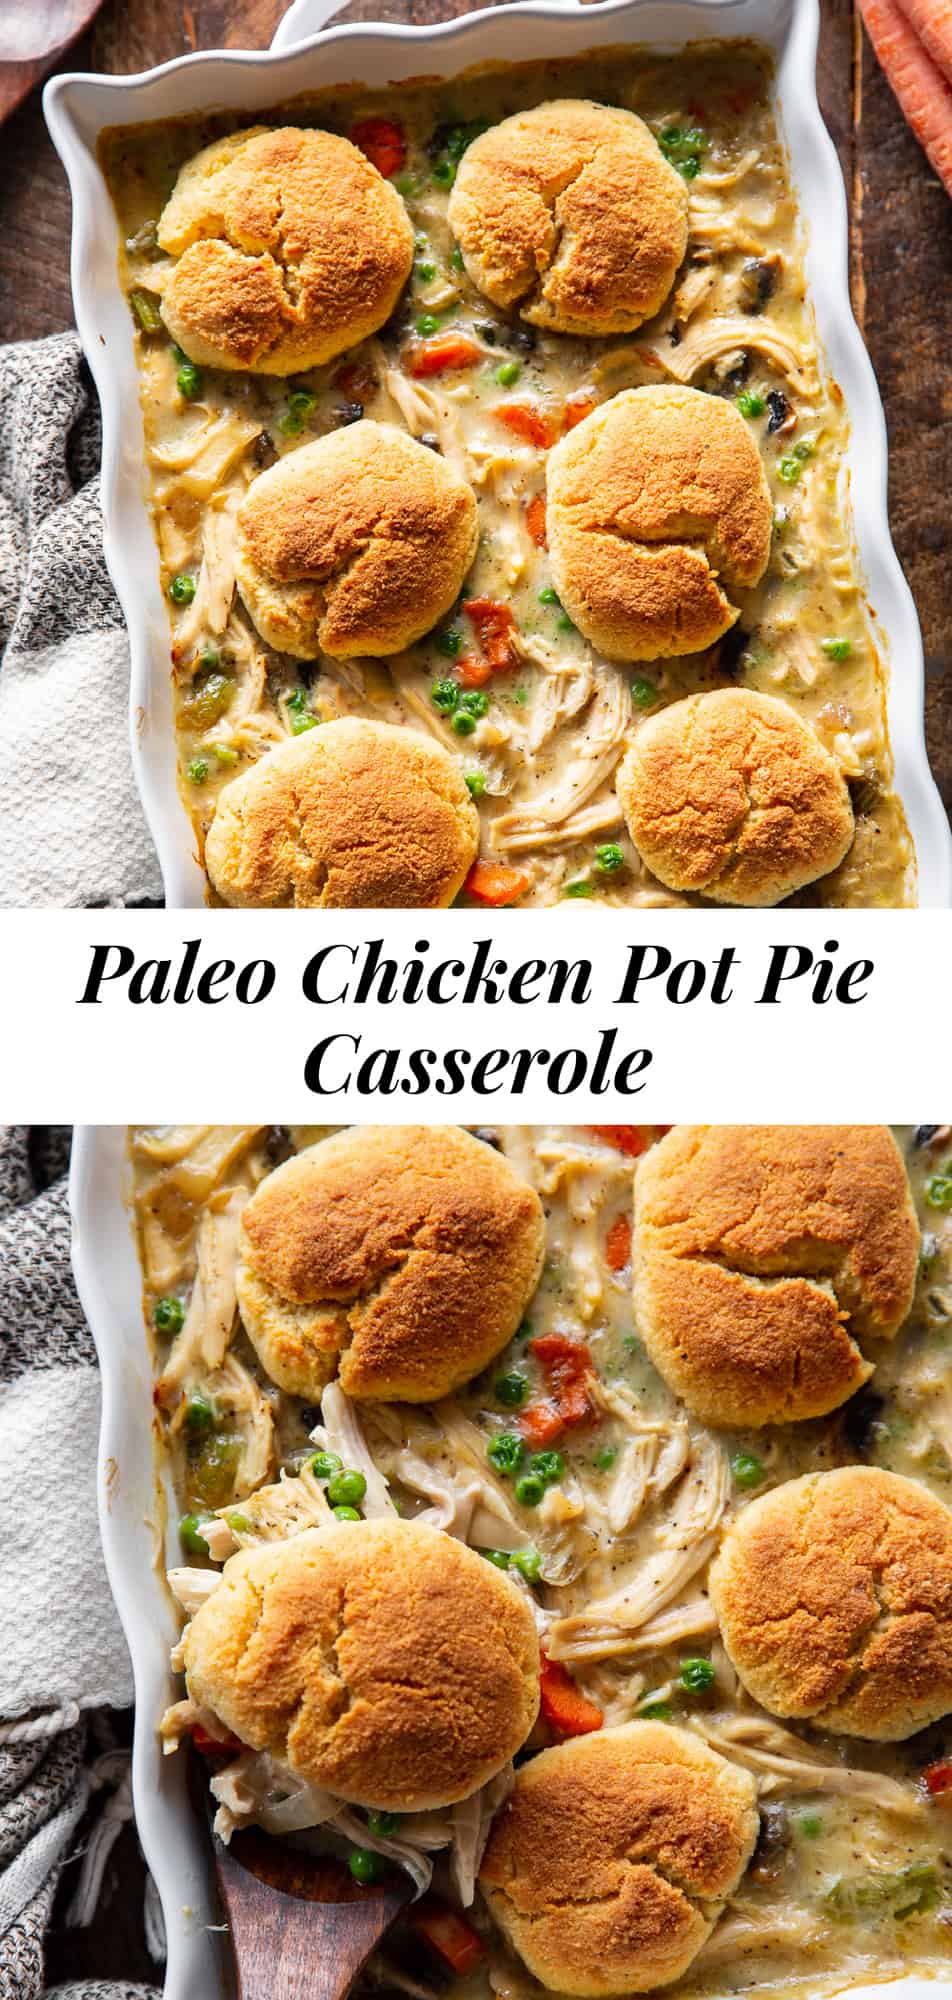 This creamy chicken pot pie casserole is packed with flavor and so cozy during the winter months. Easier to make than a traditional chicken pot pie but just as satisfying! A creamy chicken and veggie gravy is baked with buttery grain free biscuits. Gluten free, grain free, paleo.  #paleo #cleaneating #grainfree #glutenfree #lowcarb